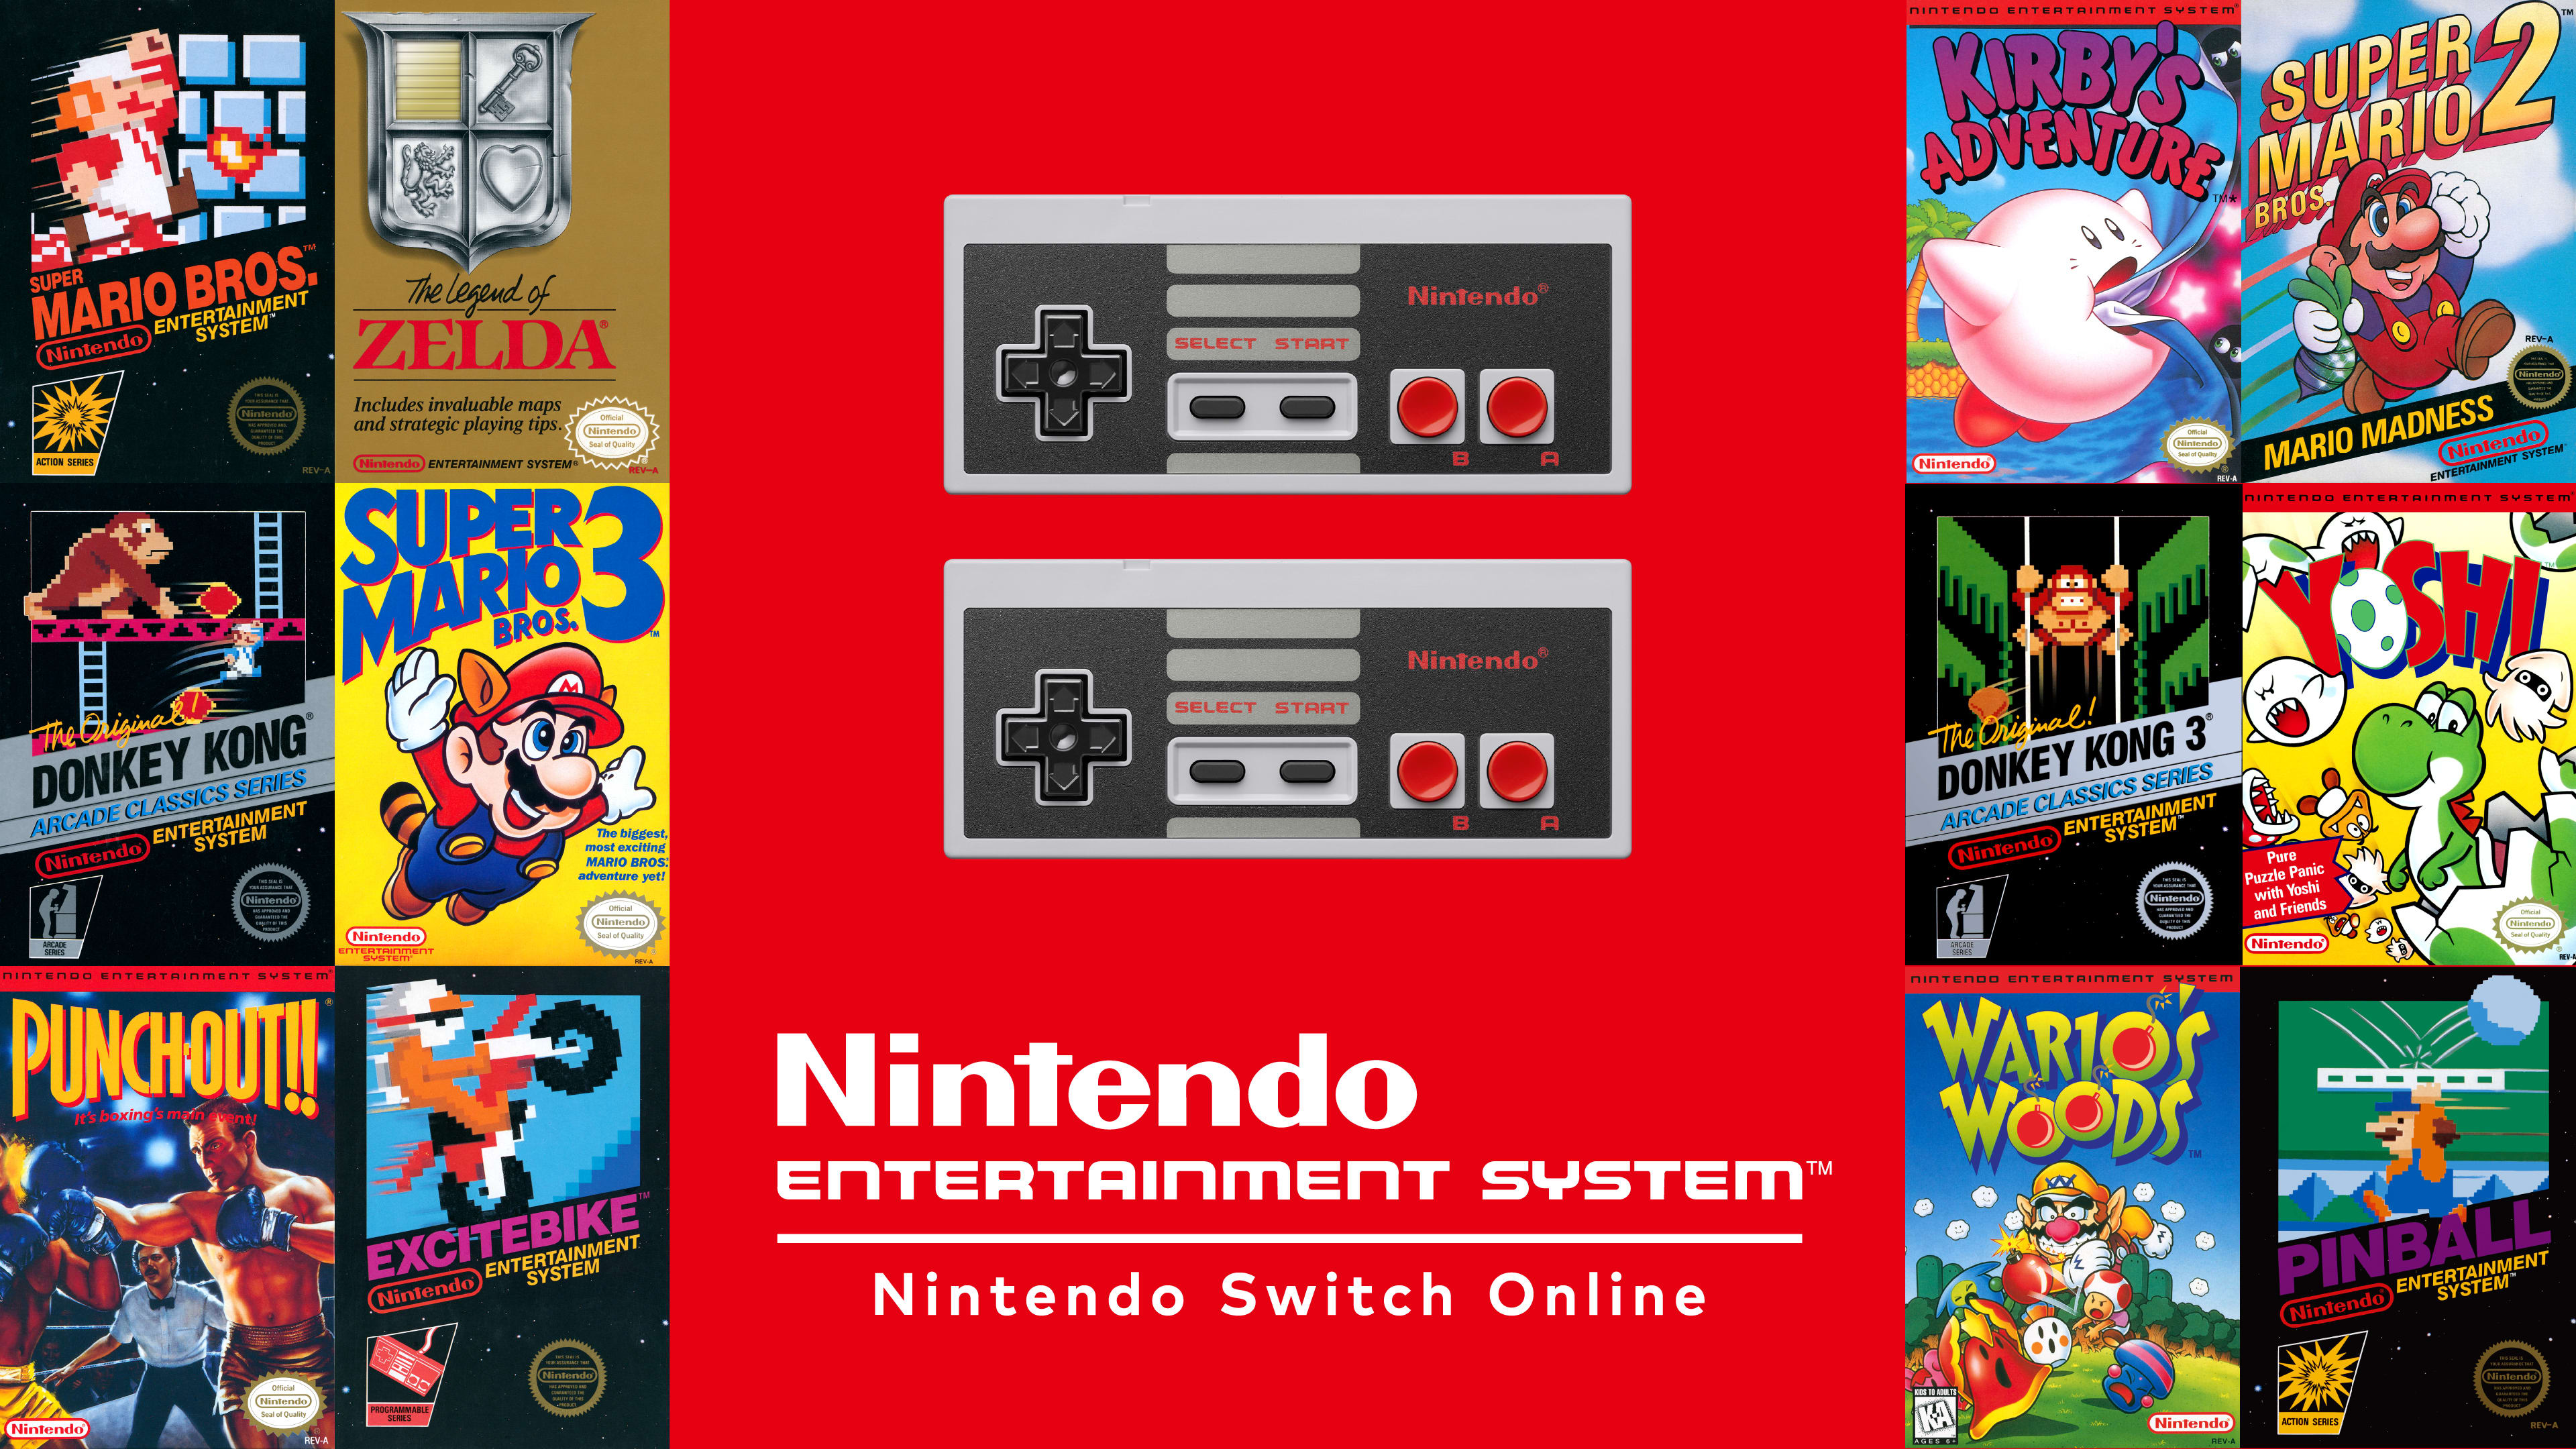 Nintendo Entertainment System controllers image with  NES - Nintendo Switch Online logo